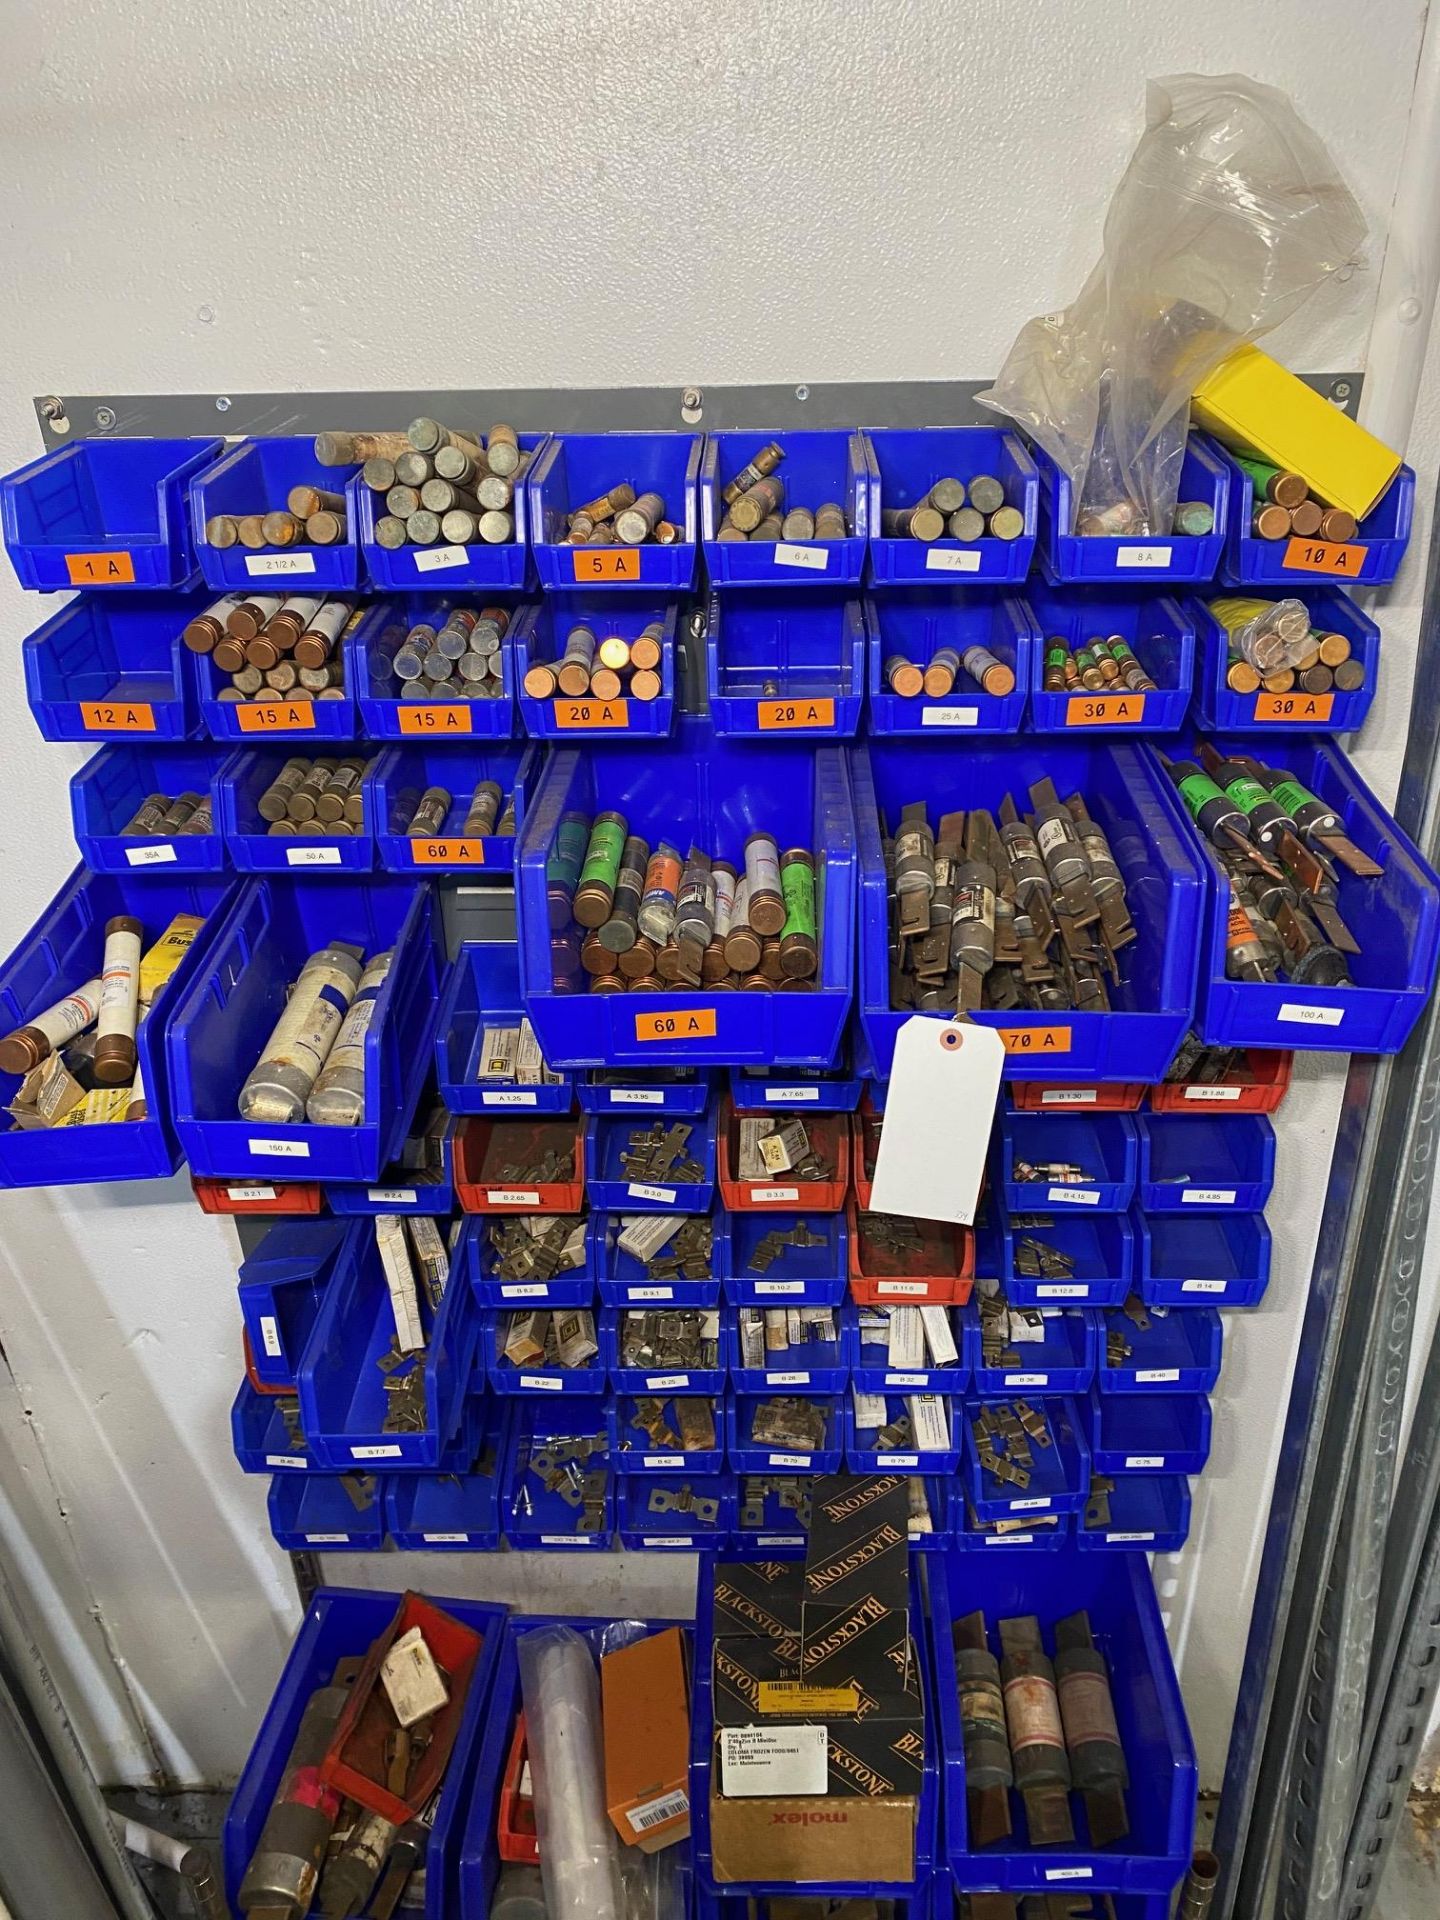 Lot of Pigeon Hole Shelving Parts Bins with Fuses, Strapping and Assorte | Rig Fee $50